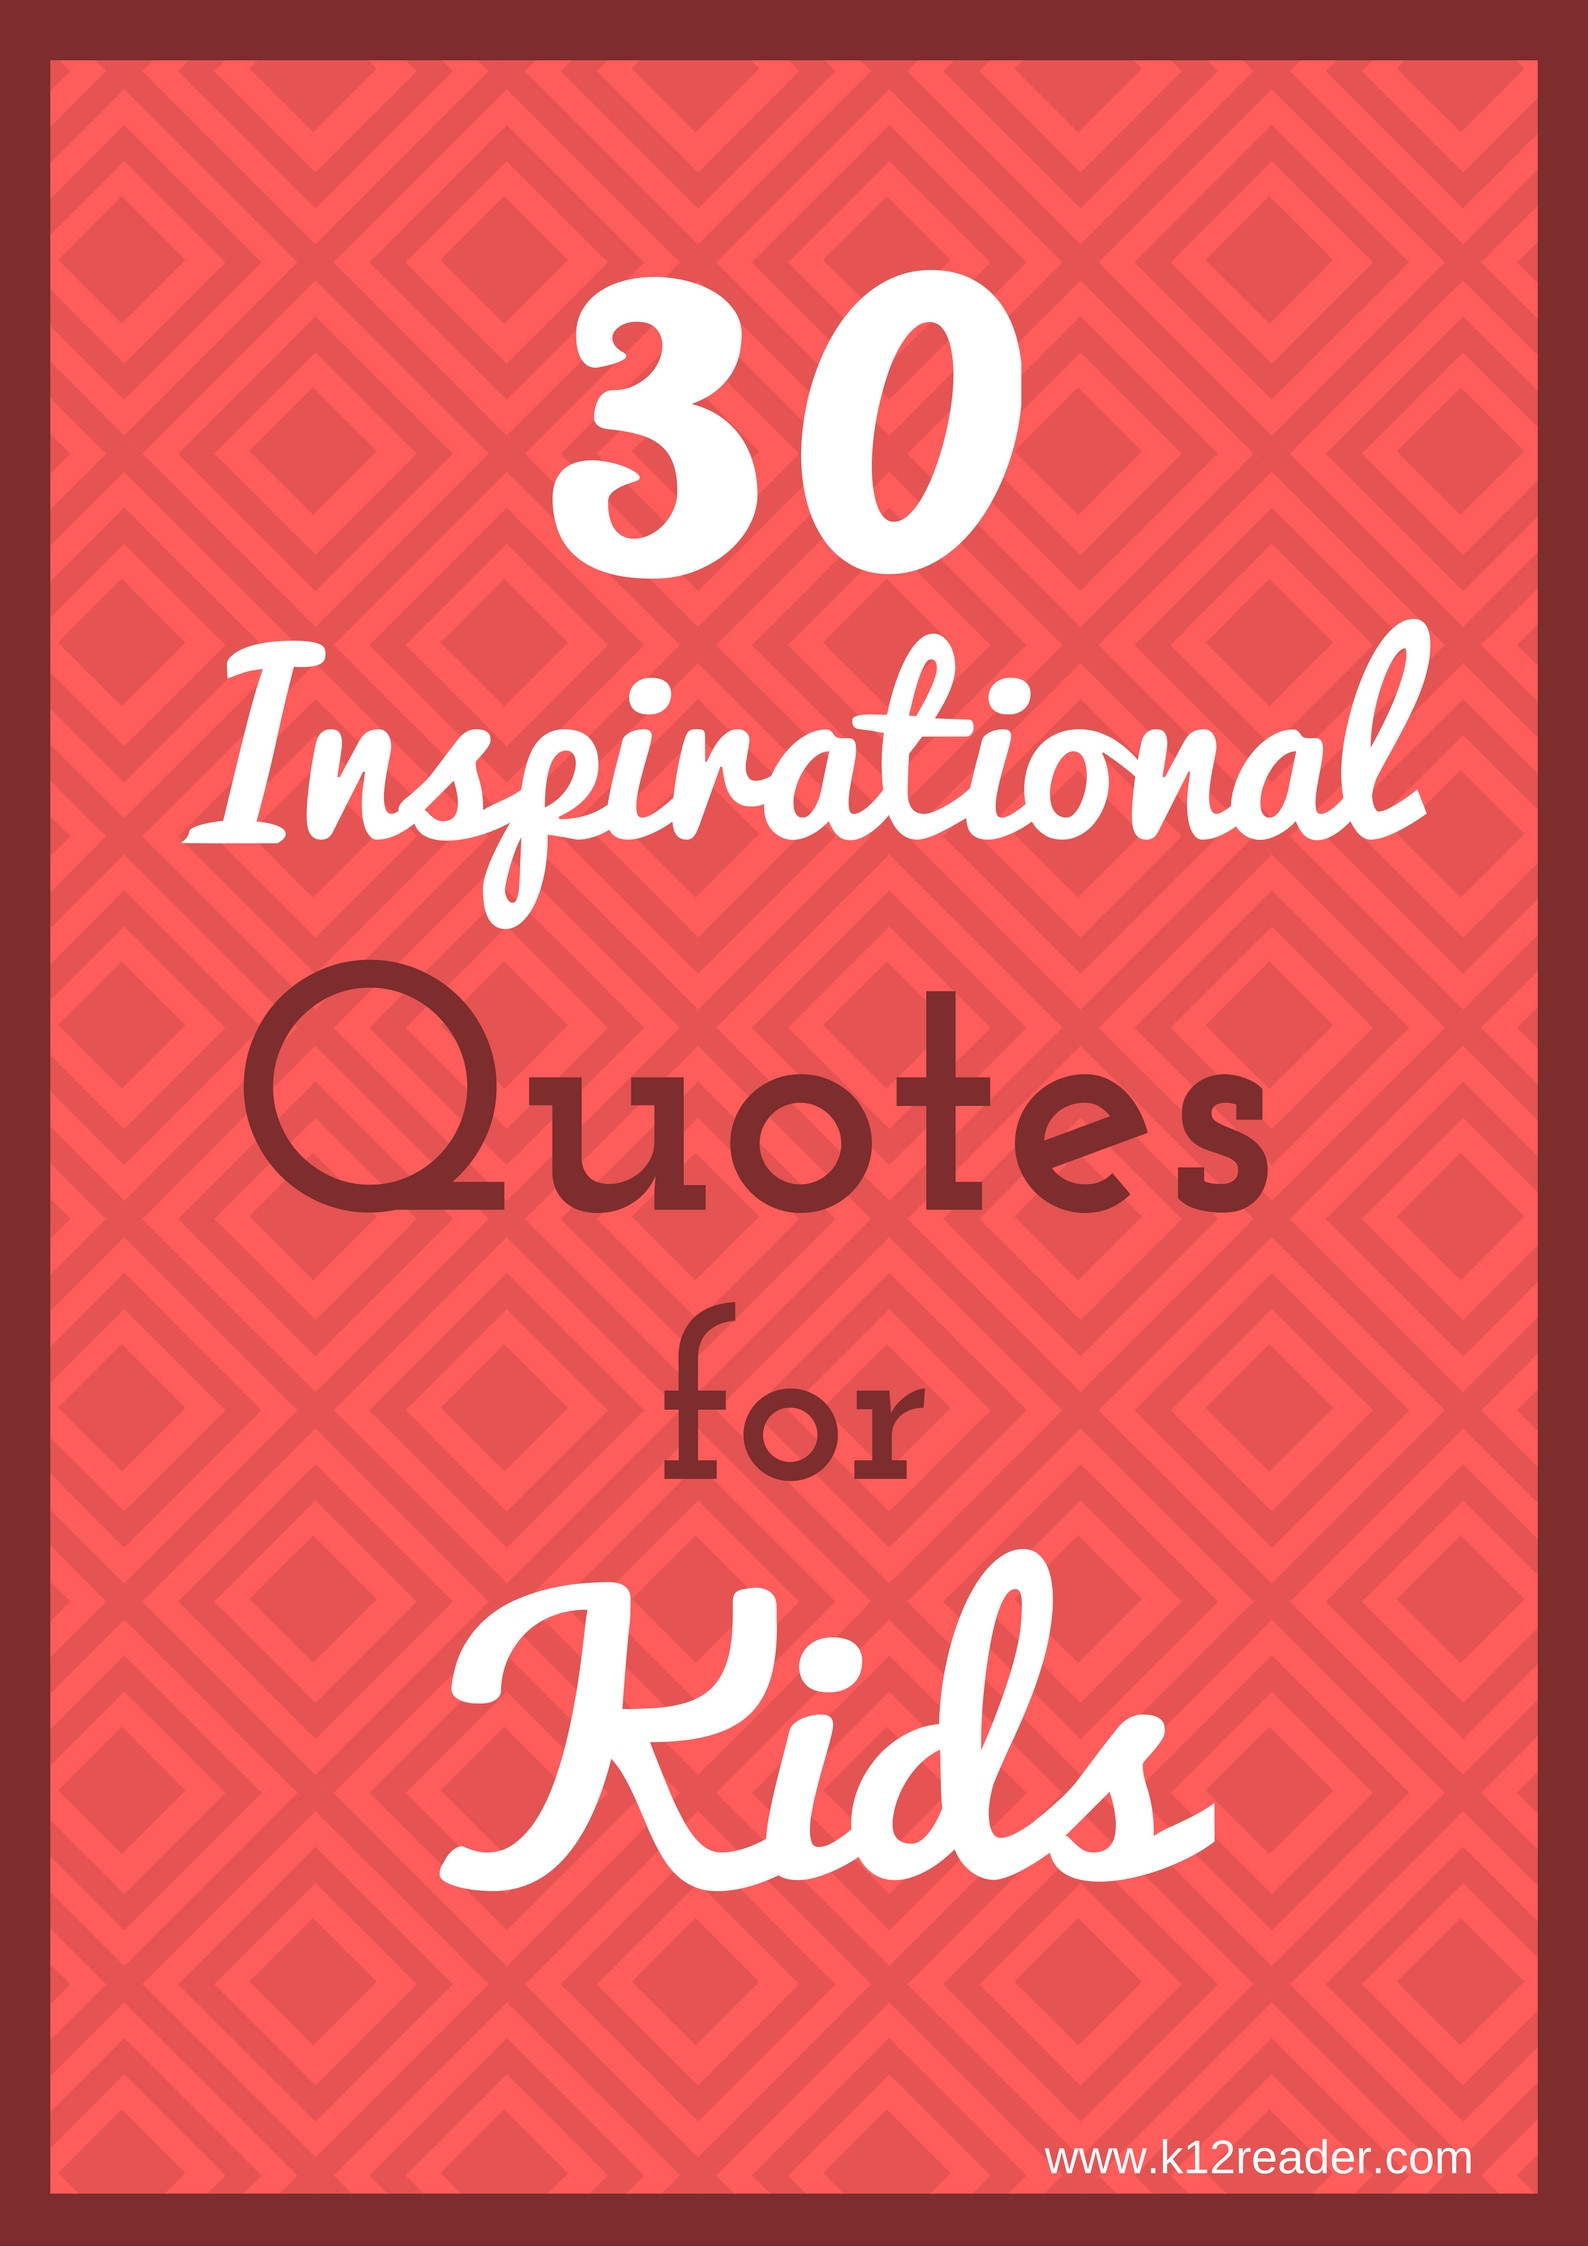 Kid Motivational Quotes
 30 Inspirational Quotes for Kids